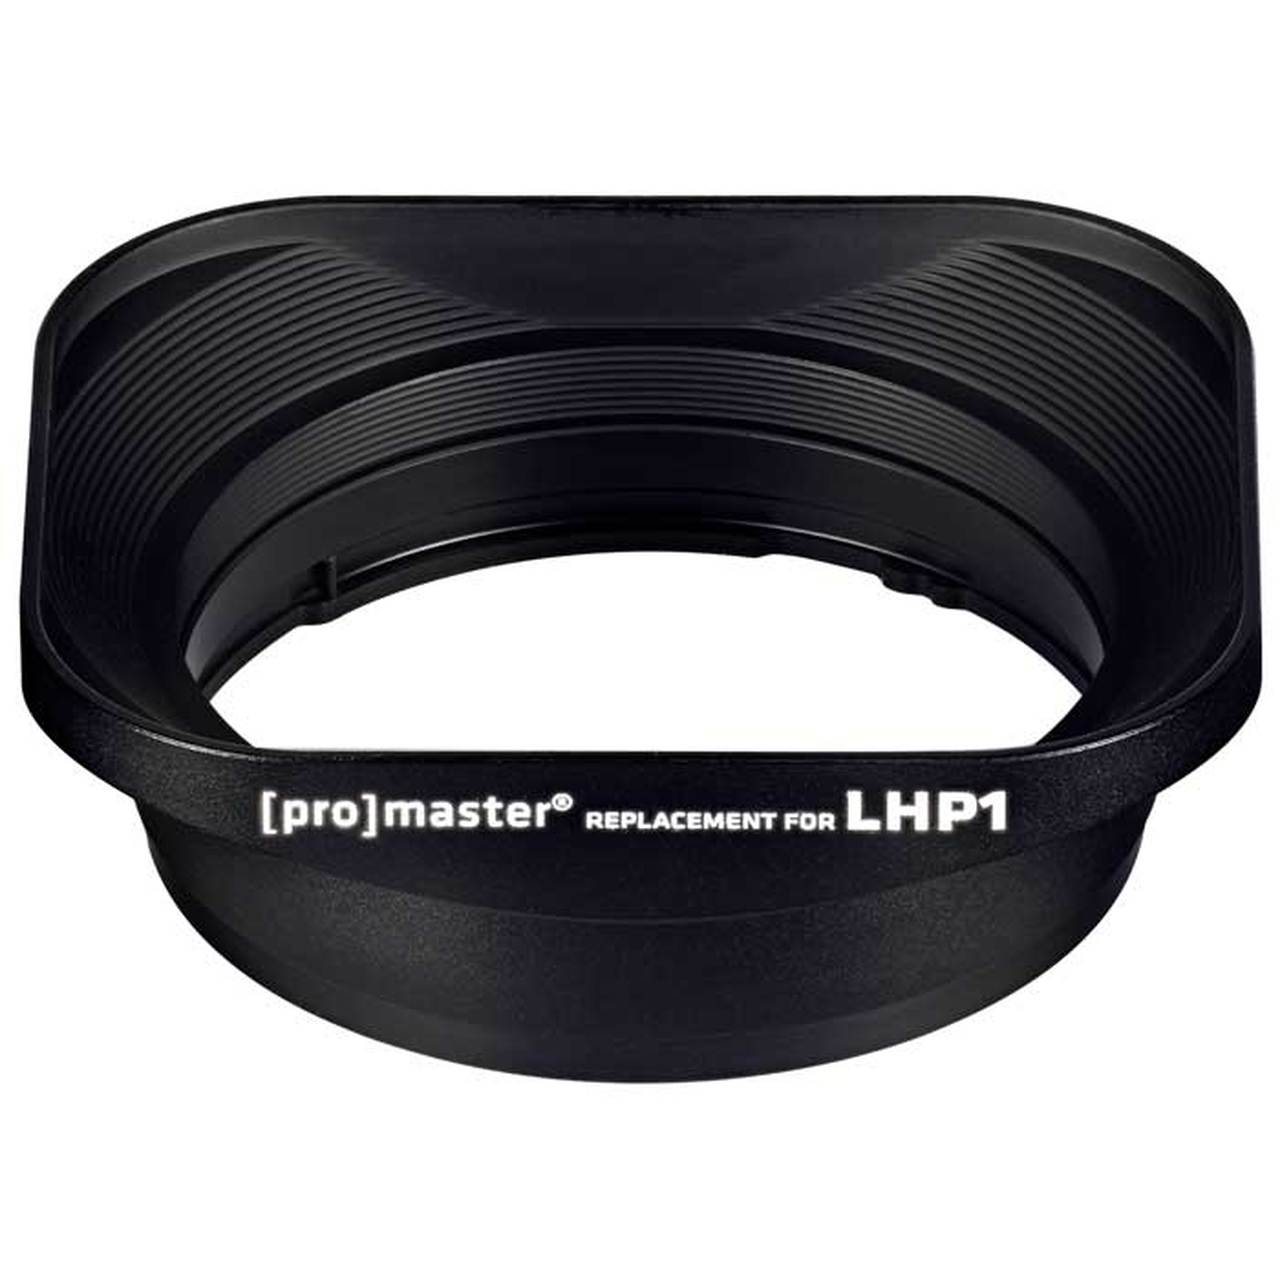 Promaster 1294 LHP1 Hood for Sony